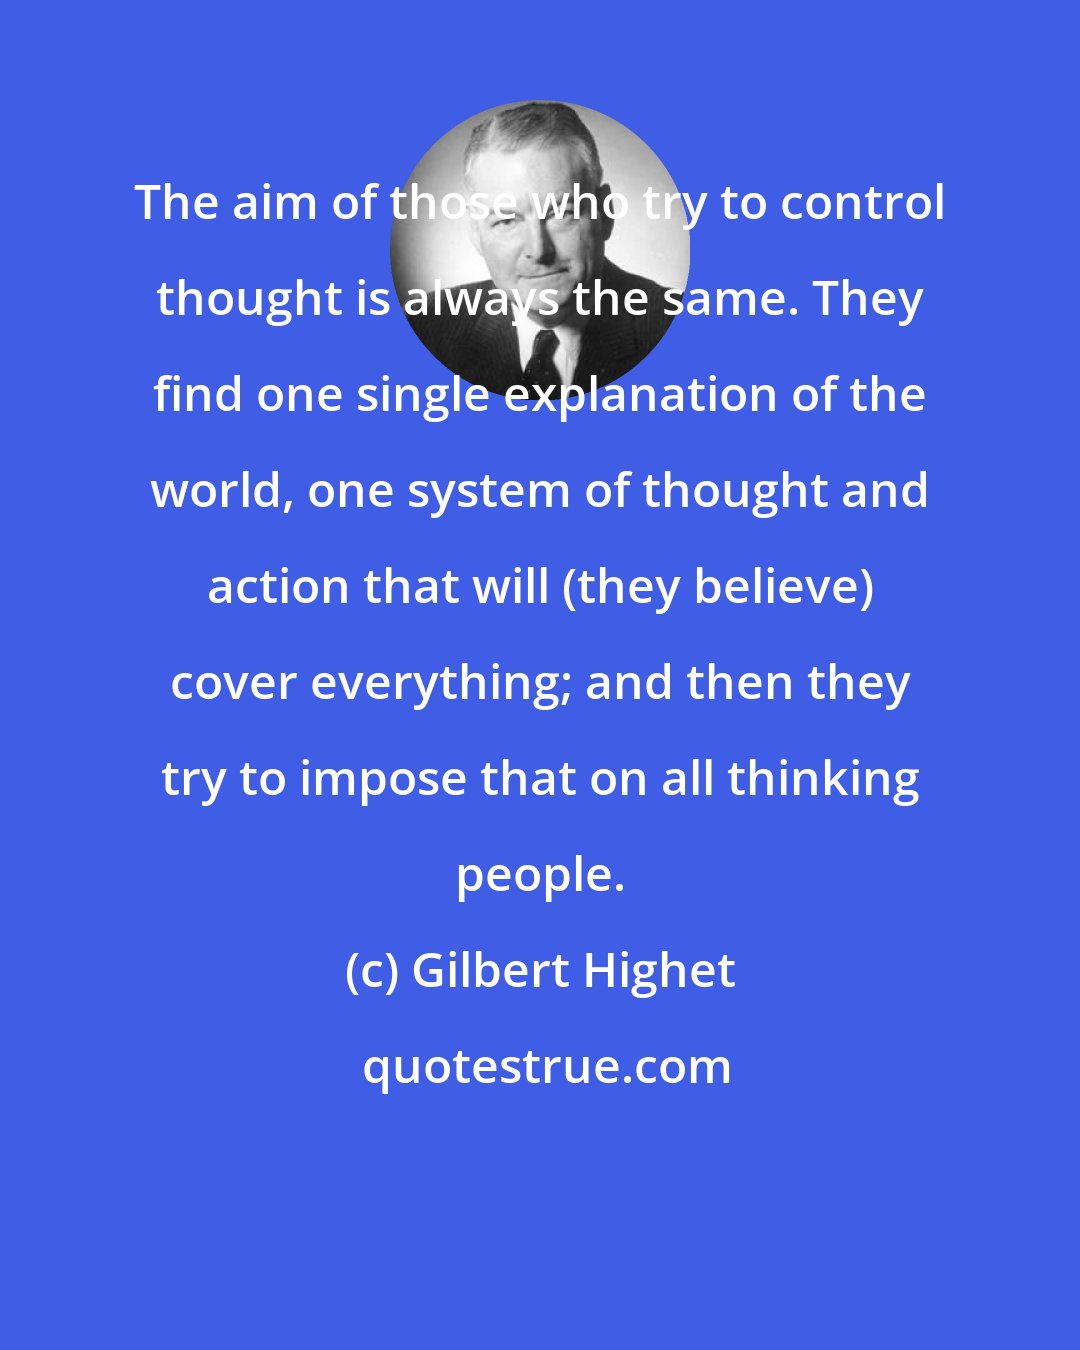 Gilbert Highet: The aim of those who try to control thought is always the same. They find one single explanation of the world, one system of thought and action that will (they believe) cover everything; and then they try to impose that on all thinking people.